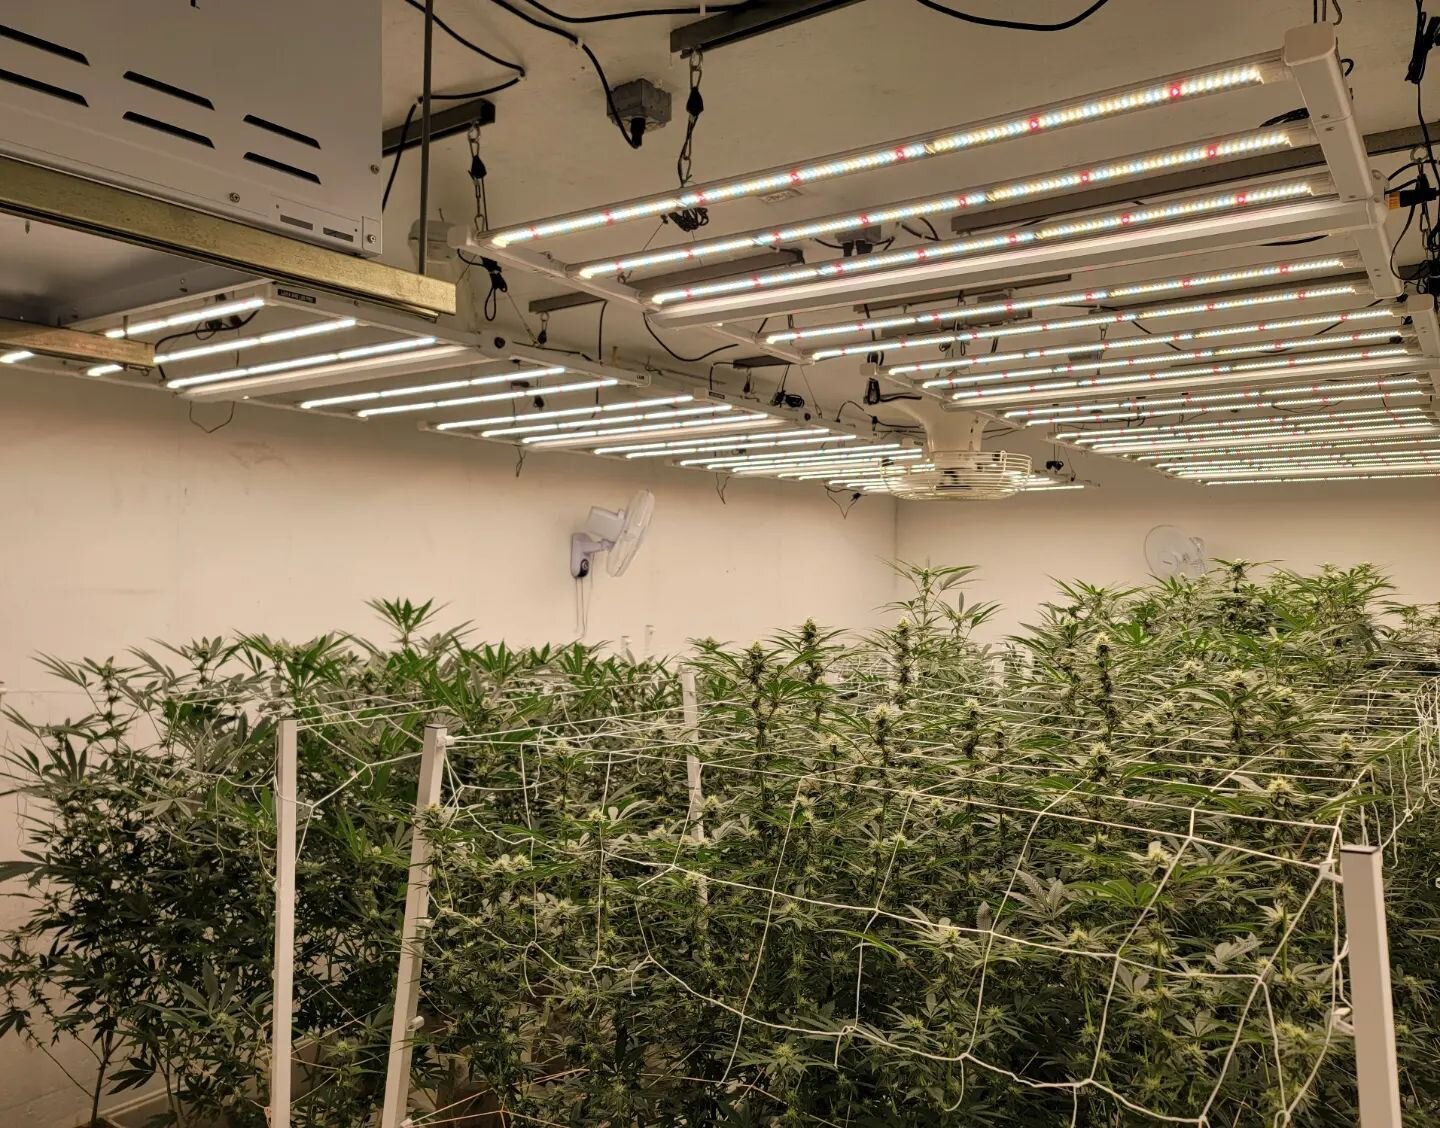 8 lights, 8 strains 👌
.
We got the flower room loaded with variety! We're trying out something new this time and loving the results so far. This room has been fed exclusively @drip_hydro 💧&amp; @power.si 💪
.
The 8 flavors we've got coming up are:
